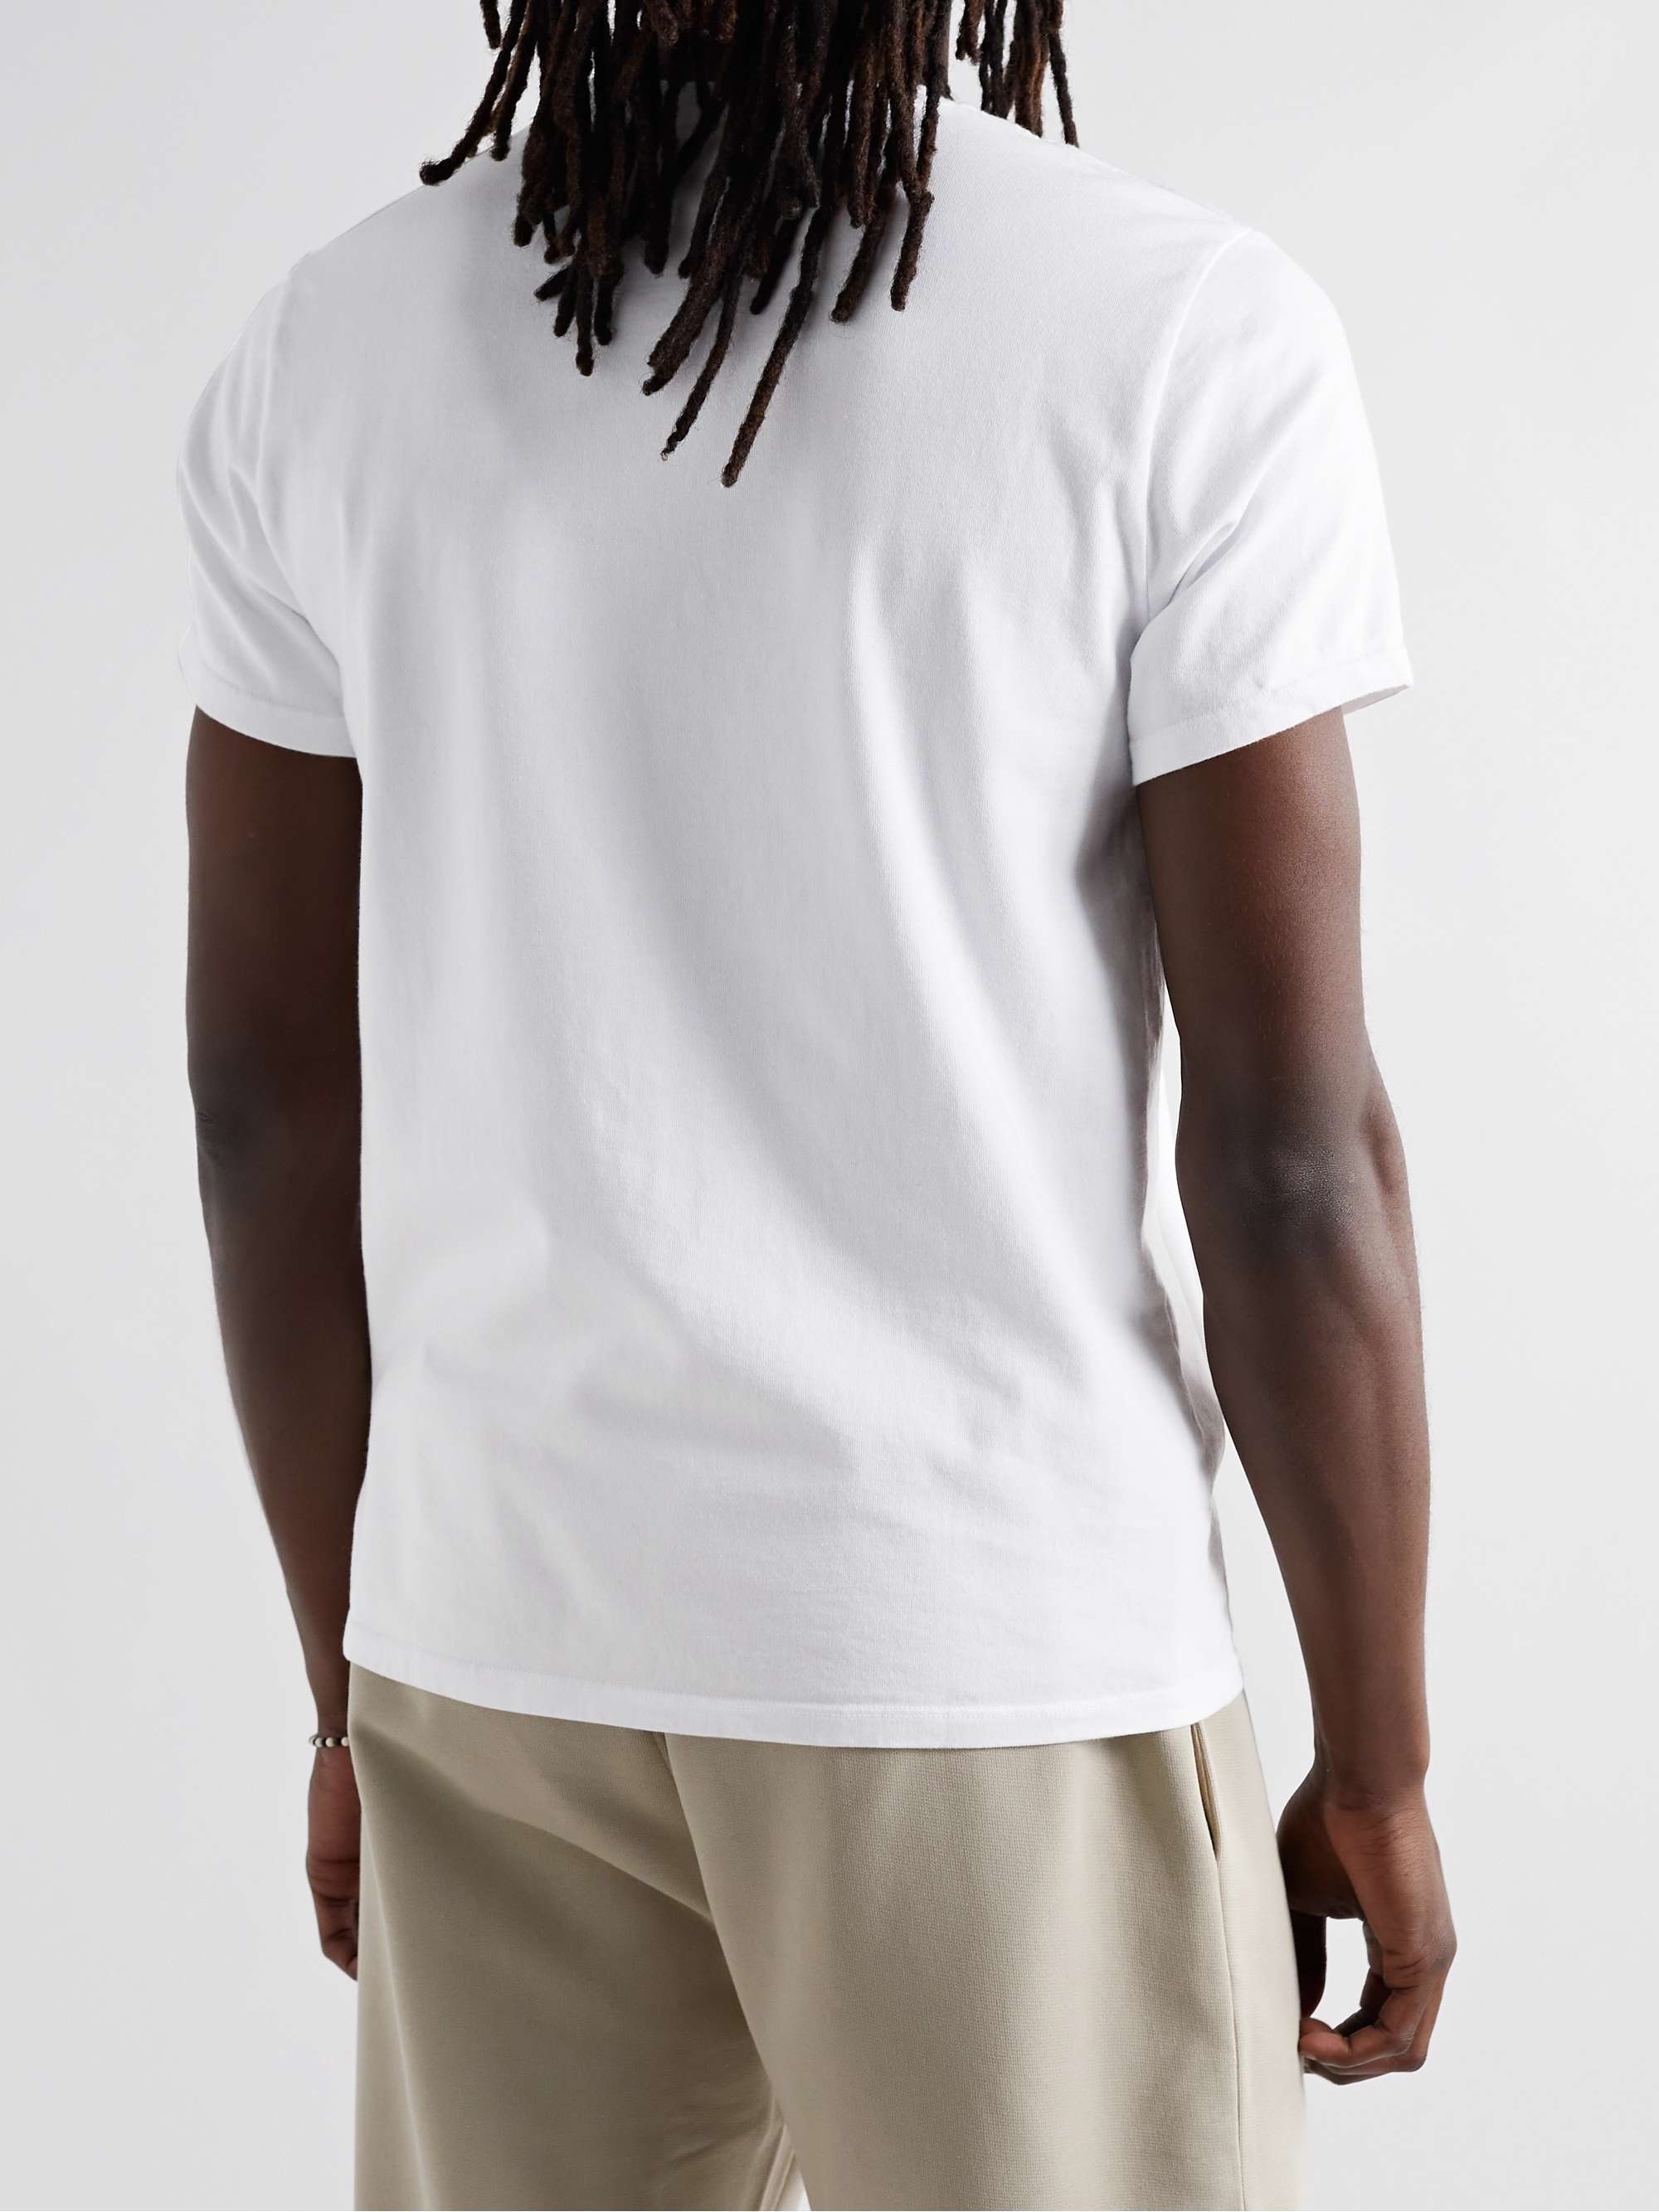 SAVE KHAKI UNITED Recycled and Organic Cotton-Jersey T-Shirt for Men ...